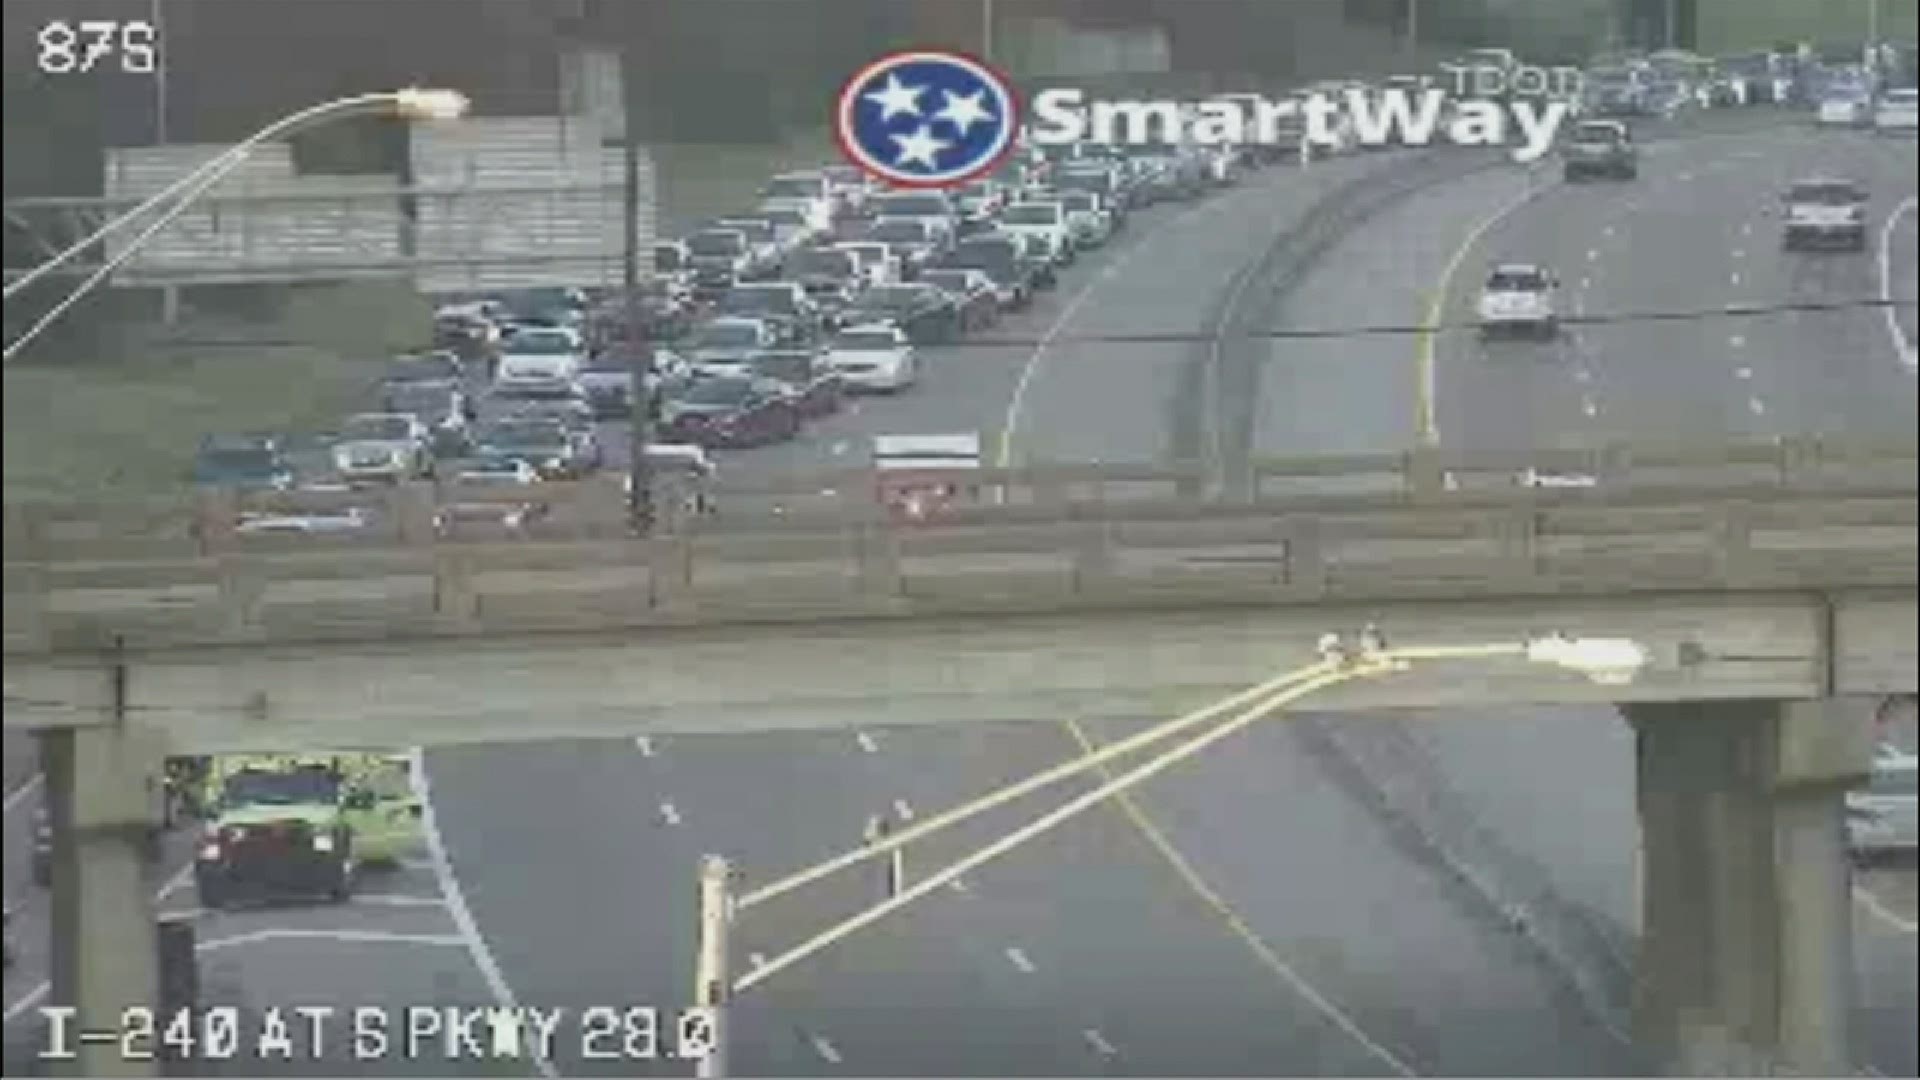 MPD has shutdown lanes of traffic on I-240 southbound near the S. Parkway exit after an interstate shooting Saturday evening